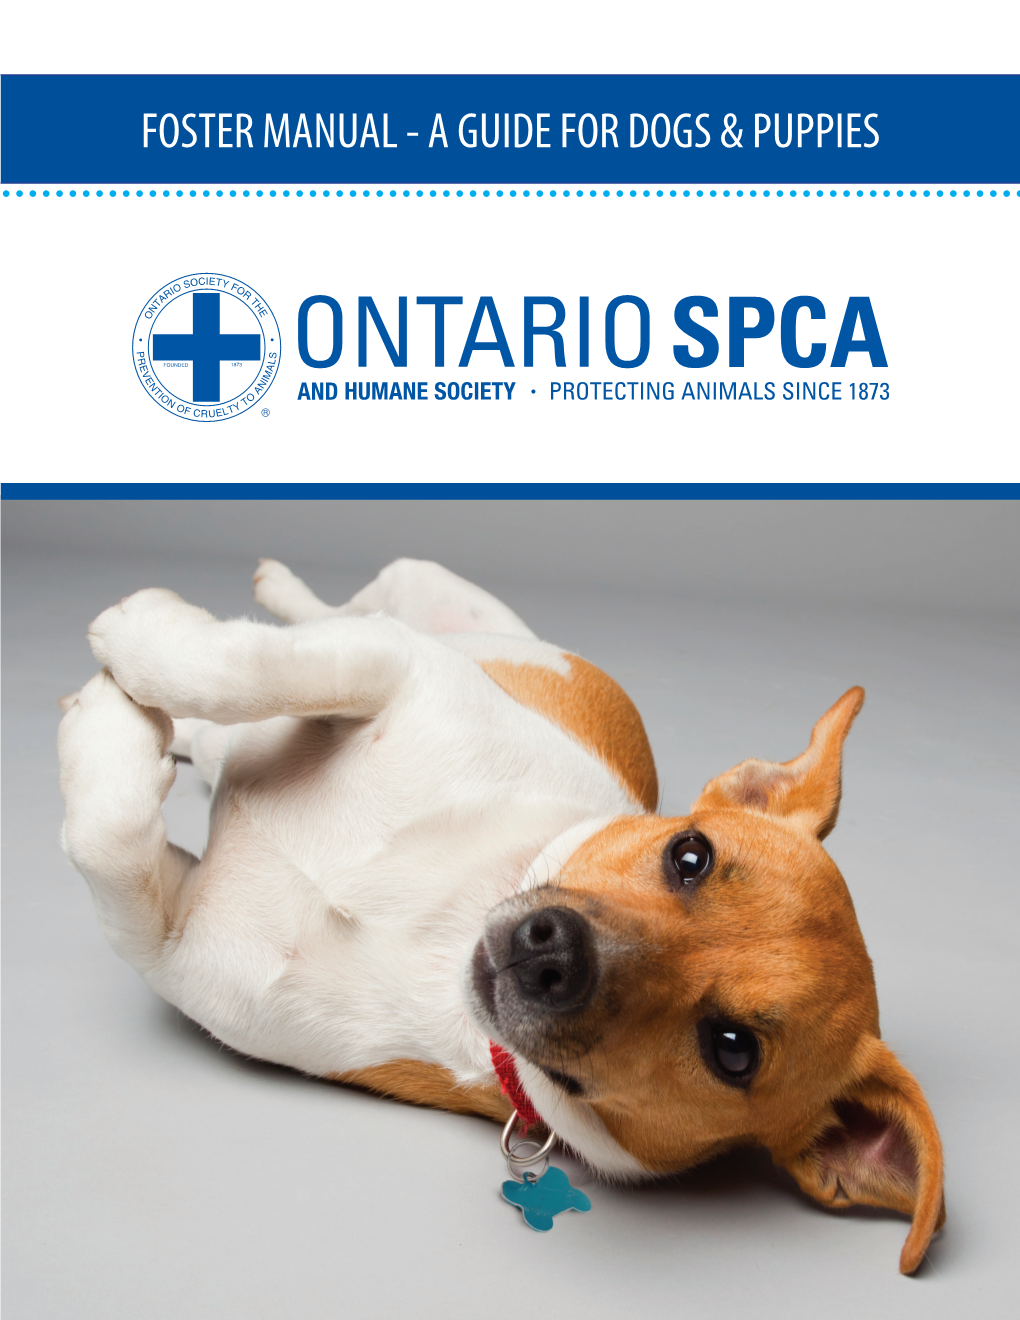 FOSTER MANUAL - a GUIDE for DOGS & PUPPIES Welcome to the Ontario SPCA Foster Care Program!